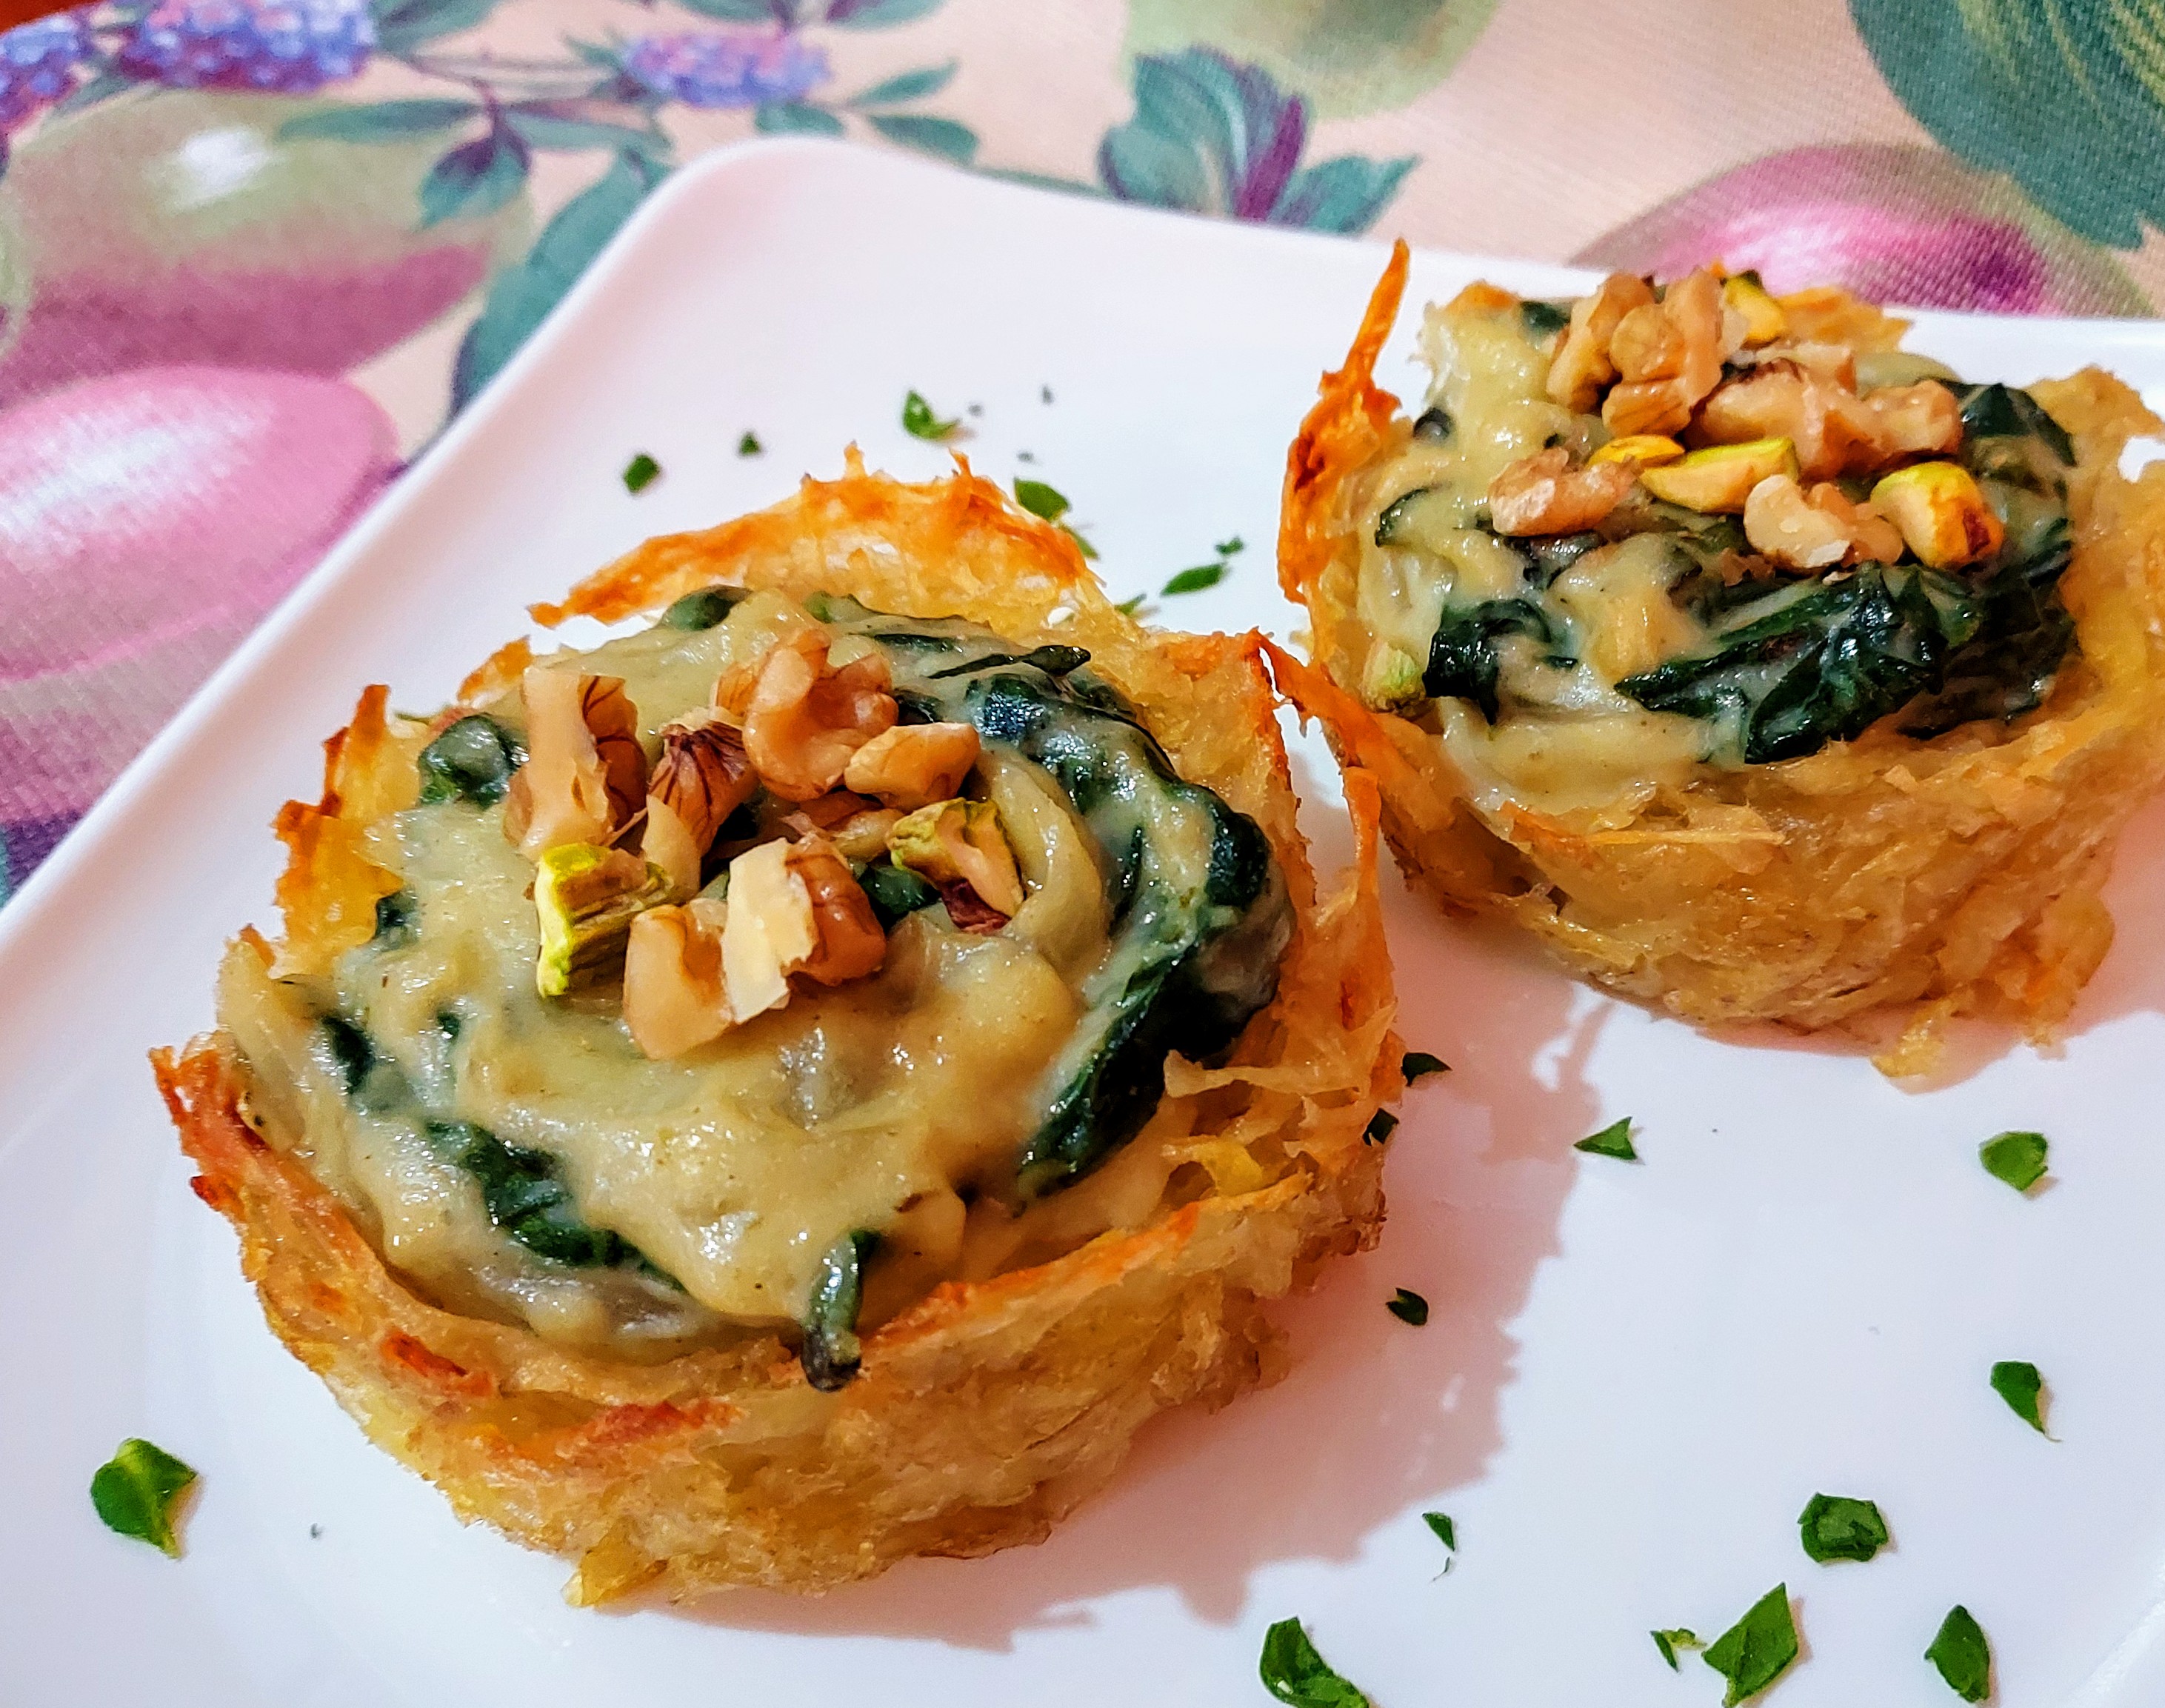 Delicious baskets of potatoes, with creamed spinach and onion..